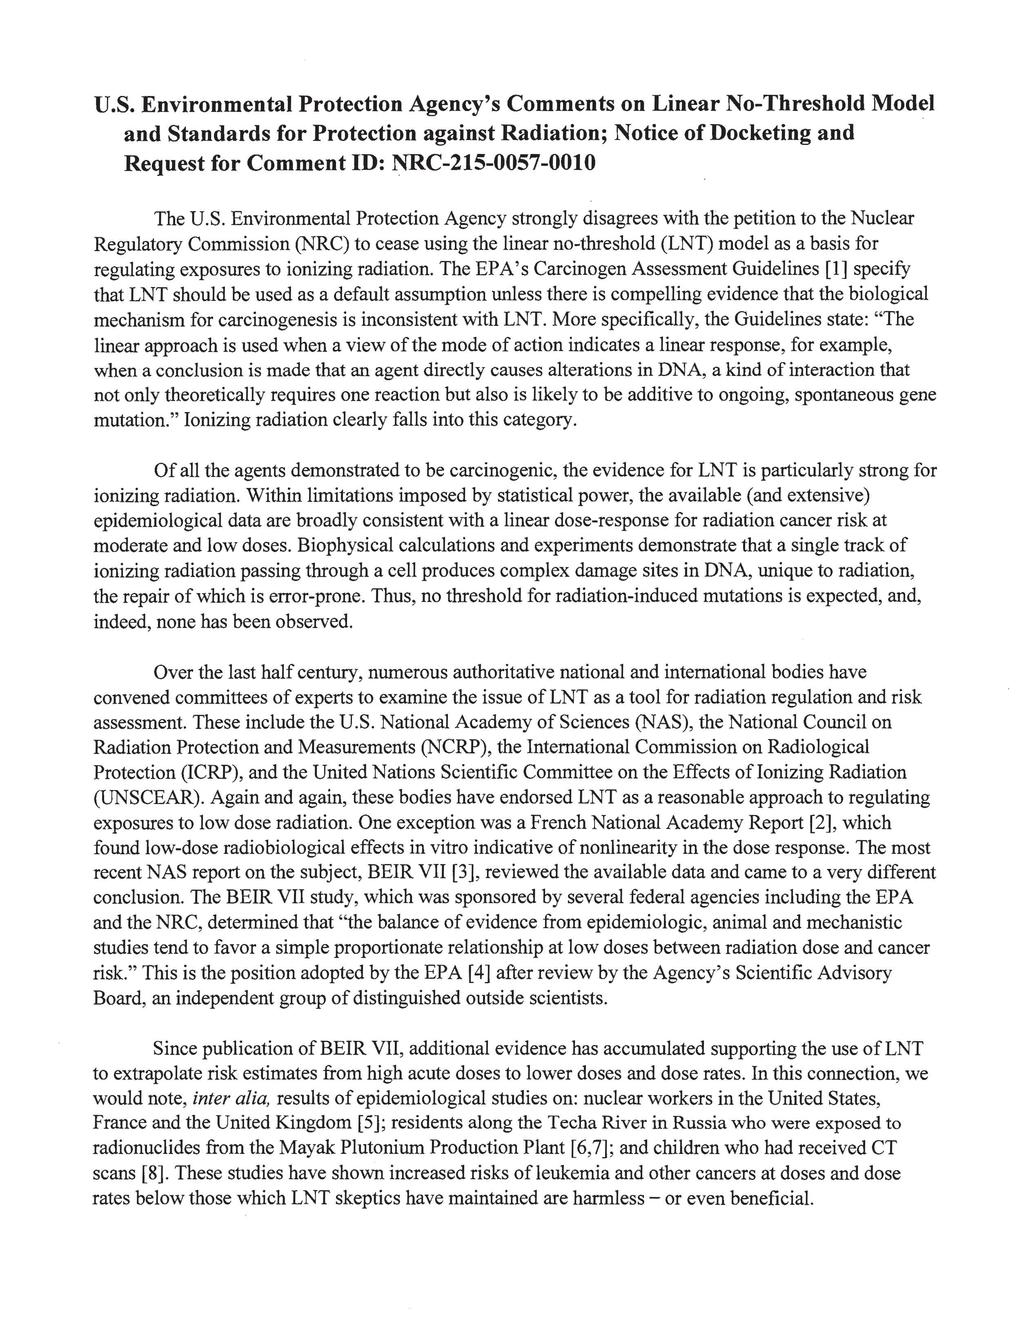 U.S. Environmental Protection Agency's Comments on Linear No-Threshold Model and Standards for Protection against Radiation; Notice of Docketing and Request for Comment ID: NRC-215-0057-0010 The U.S.